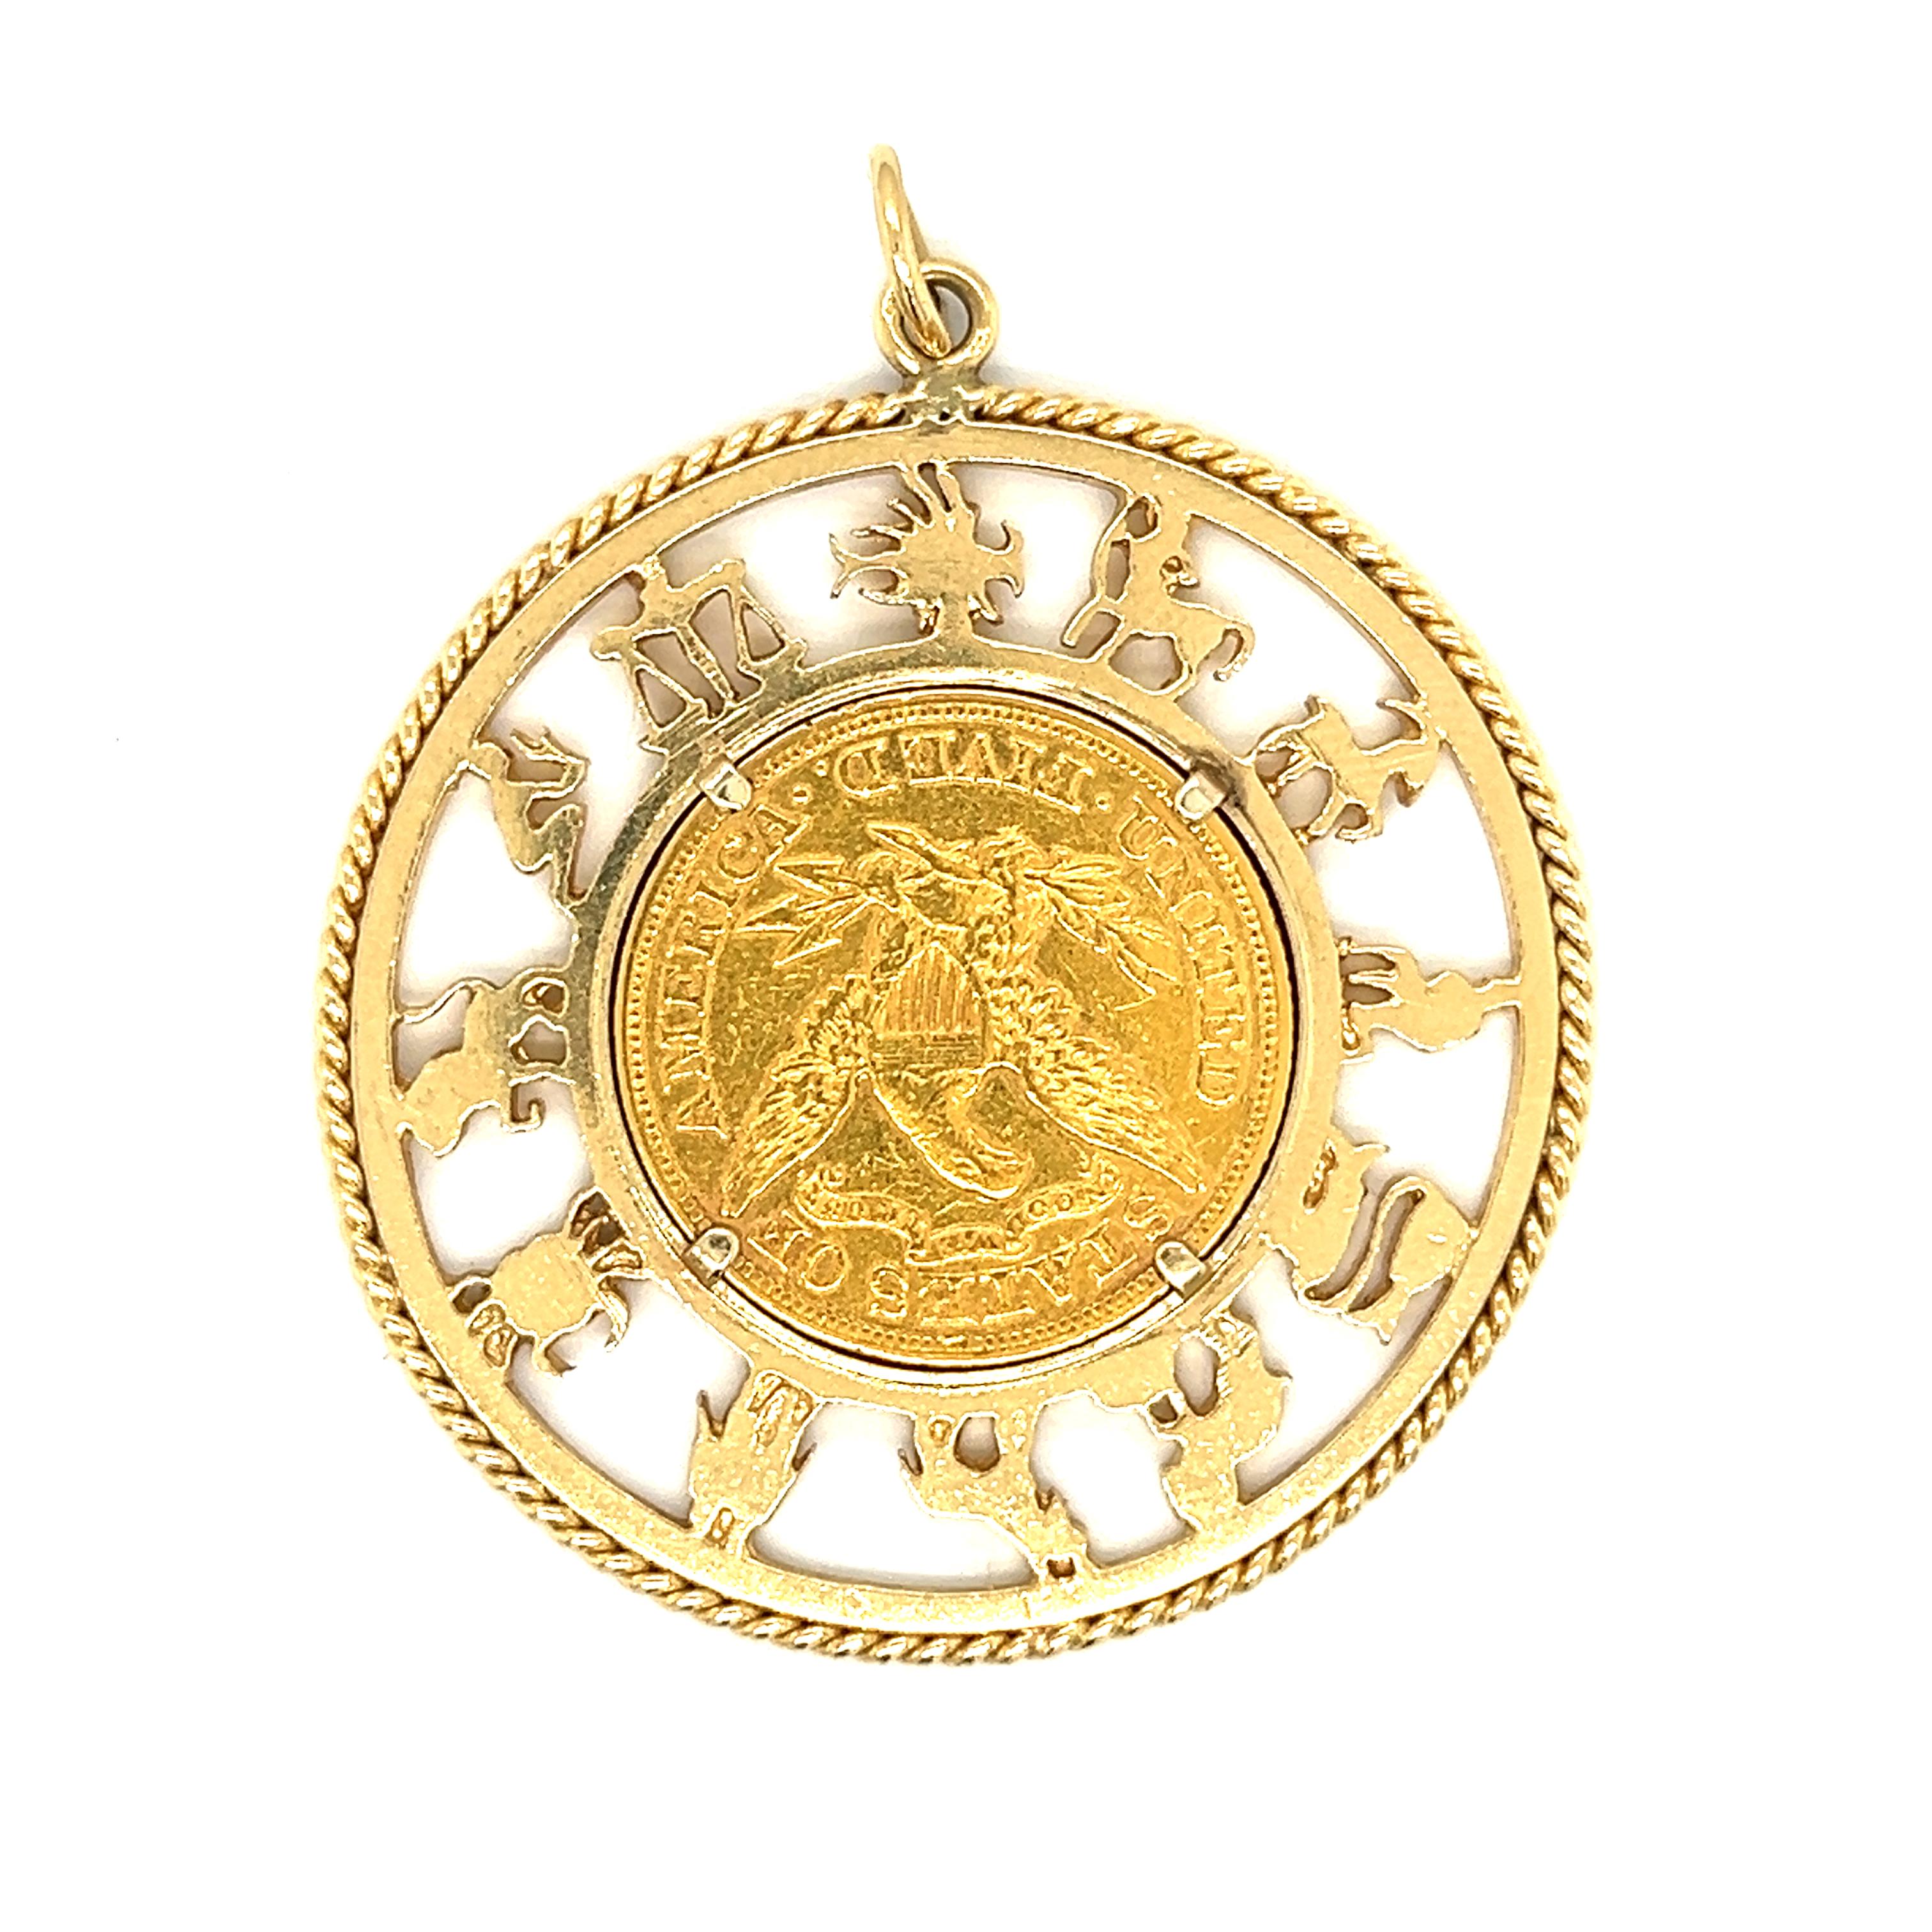 Vintage jewelry lovers will appreciate this timeless piece. Crafted with 14k gold, it features a mid-century Vintage Zodiac design and a 22k coin from 1878, for a truly distinctive look. An unmissable addition to any collection.